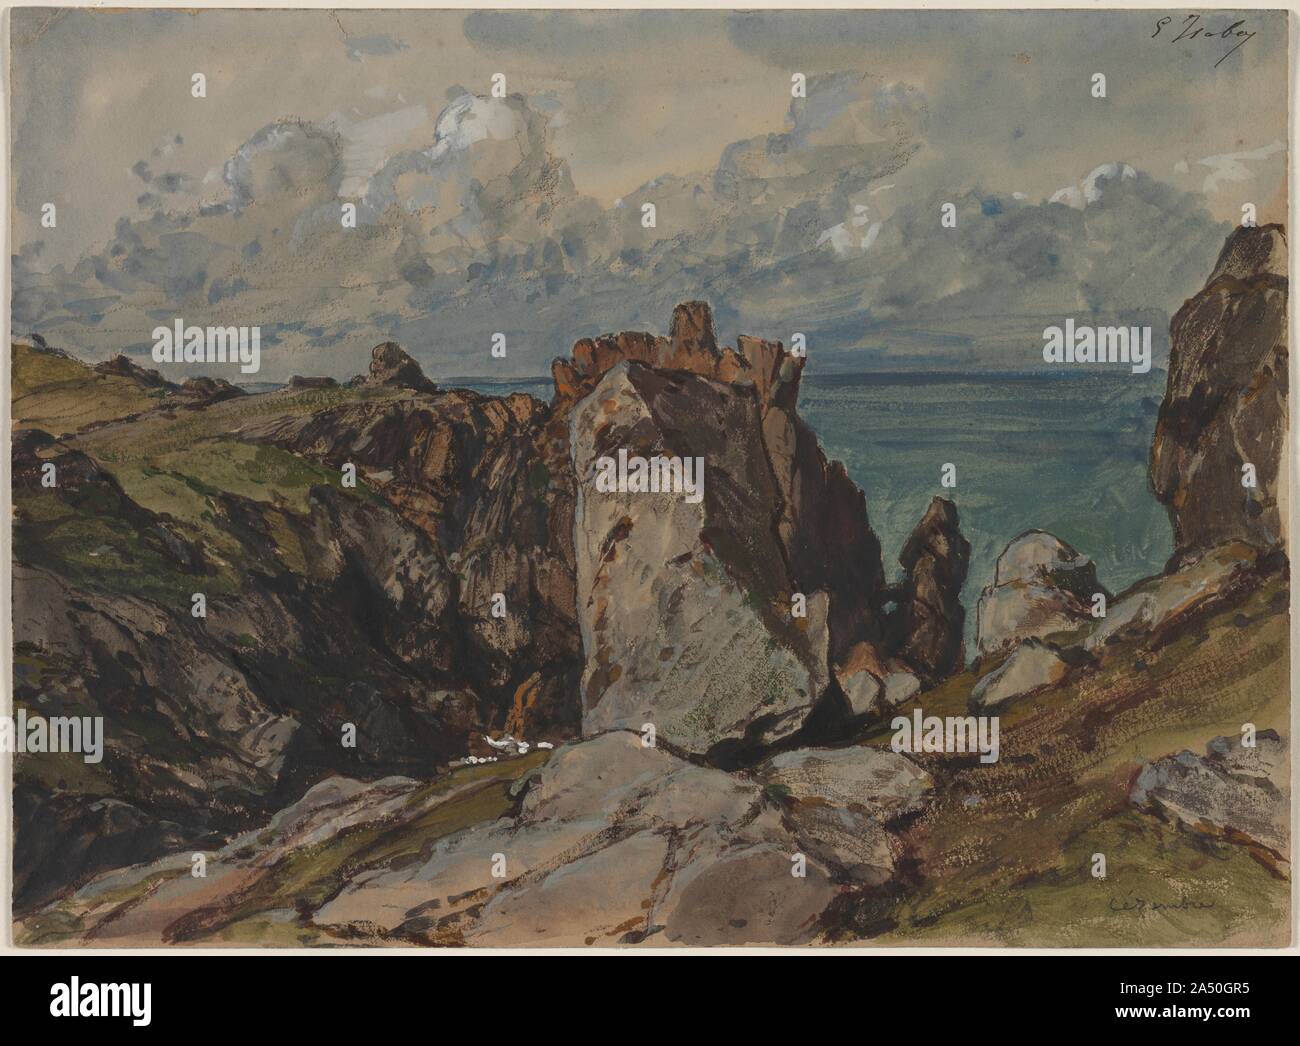 Cliffs by the Sea at C&#xe9;zembre, Brittany, c. 1830. Isabey was primarily known for his watercolours and paintings of marine and beach scenes. As a young artist, he met and befriended Eugene Delacroix and Richard Parkes Bonington and traveled with them to England in 1825 where he was able to study the work of J. M. W. Turner and the English watercolourists. Isabey was one of the first French painters to work en plein air, or directly from nature. He proved to be an important French landscapist whose life spanned almost the entire 19th century. He contributed illustrations to the Voyage pitto Stock Photo